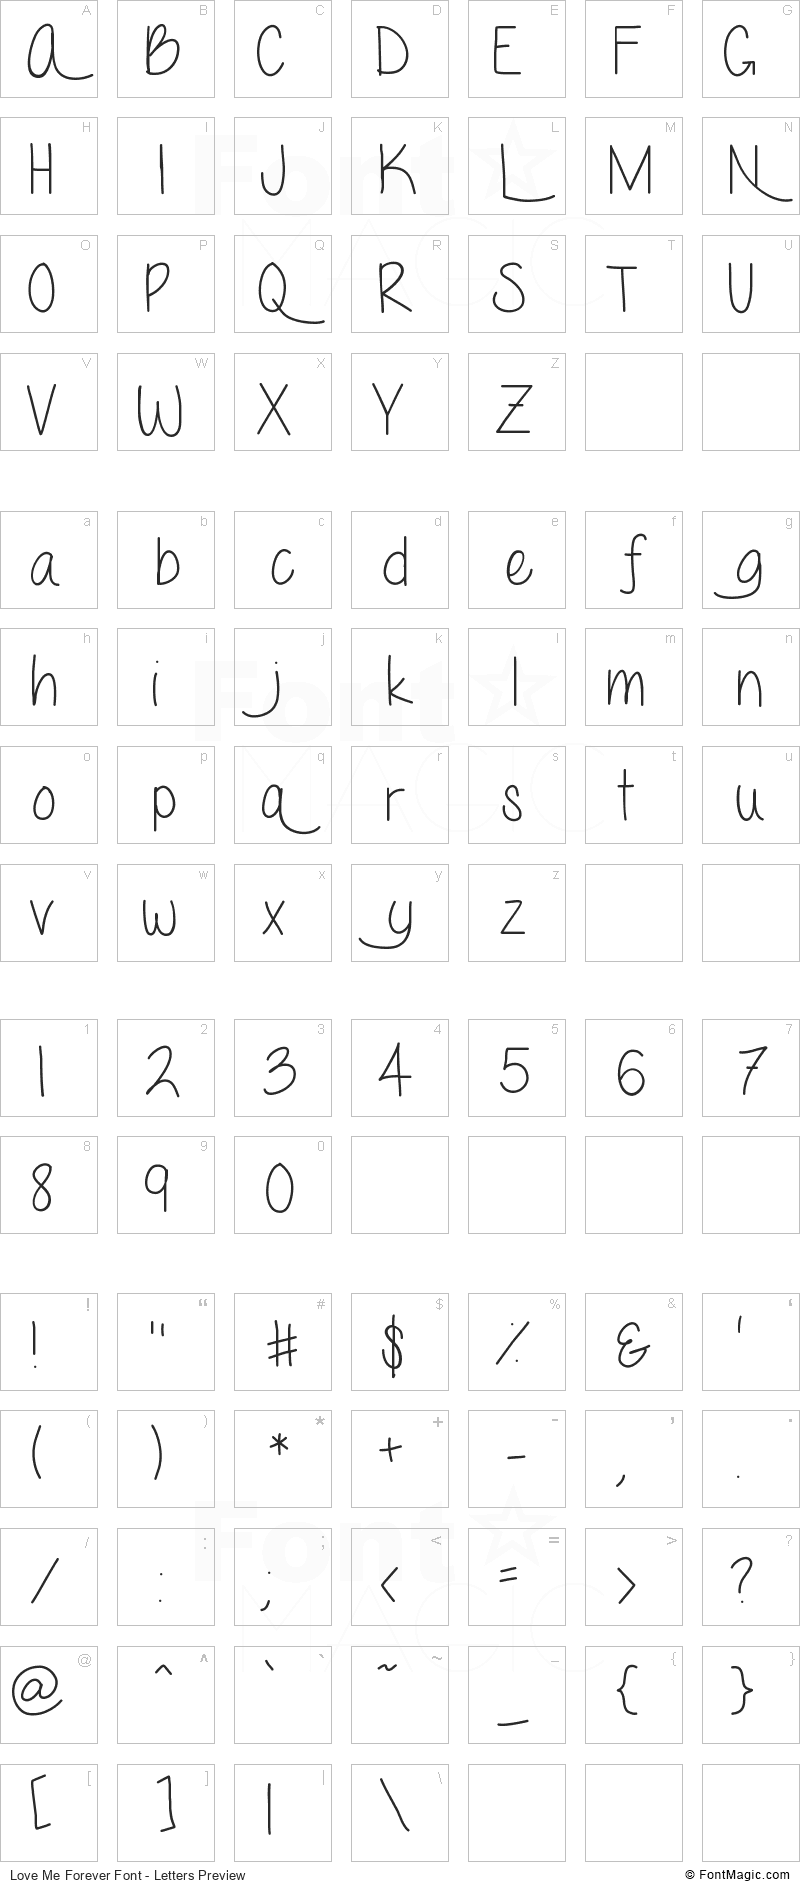 Love Me Forever Font - All Latters Preview Chart